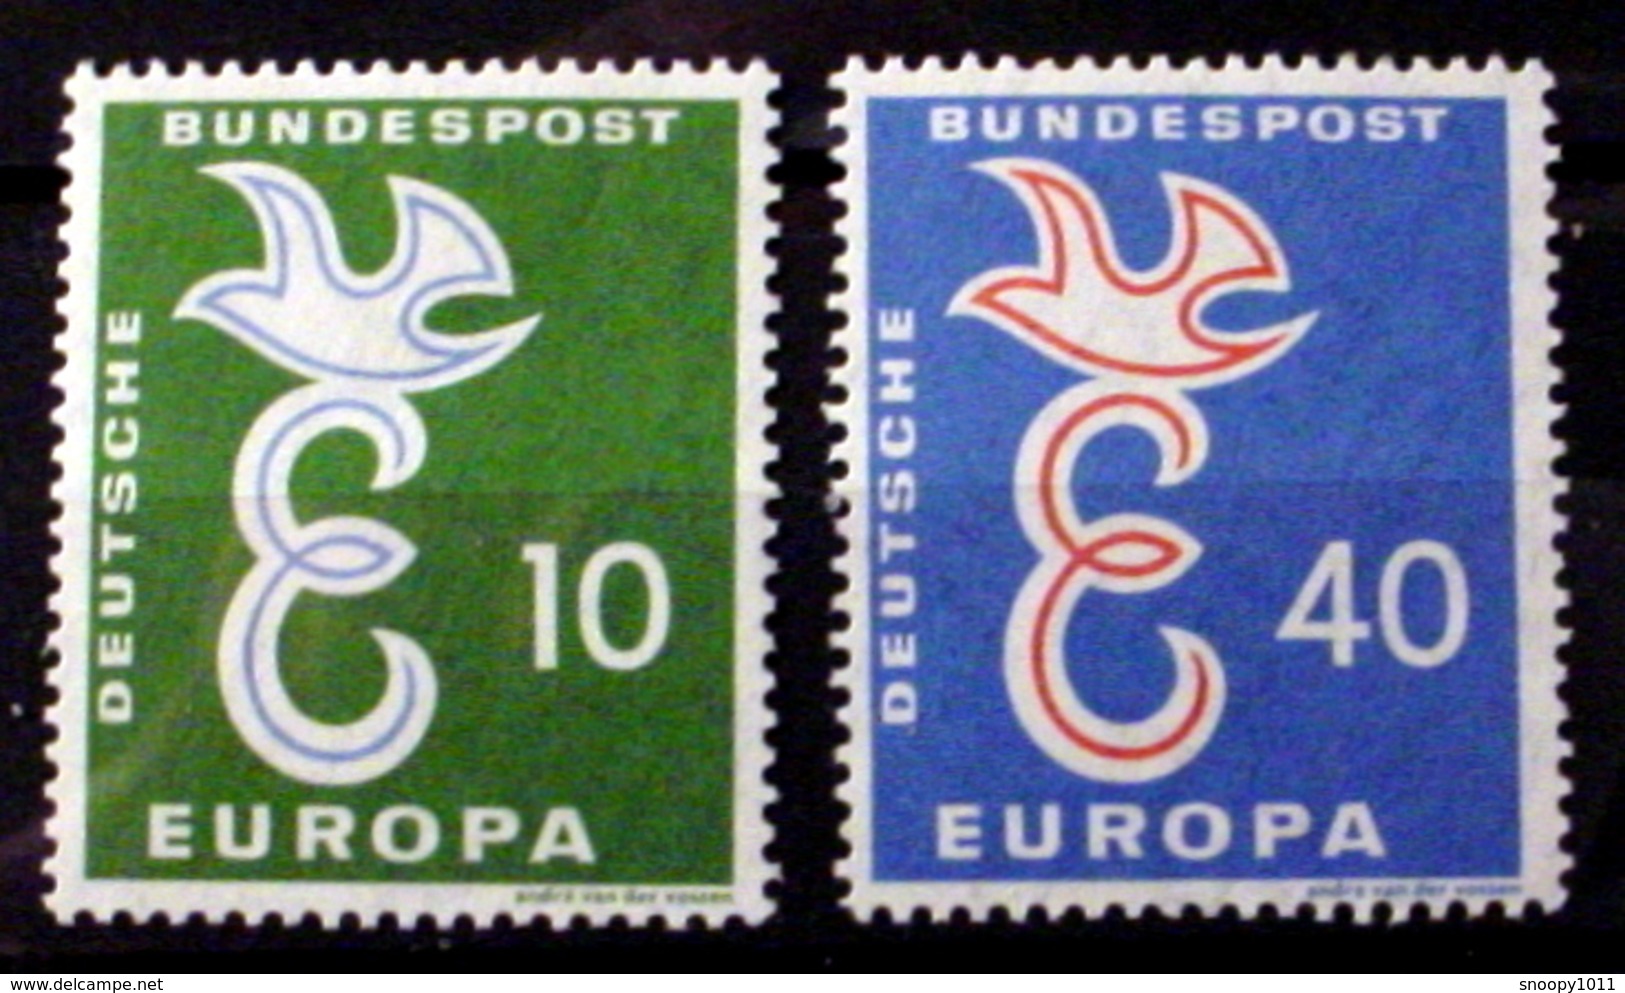 GERMANY # 790-791.   EUROPA - European Postal Service.  MNH (**) - Unused Stamps